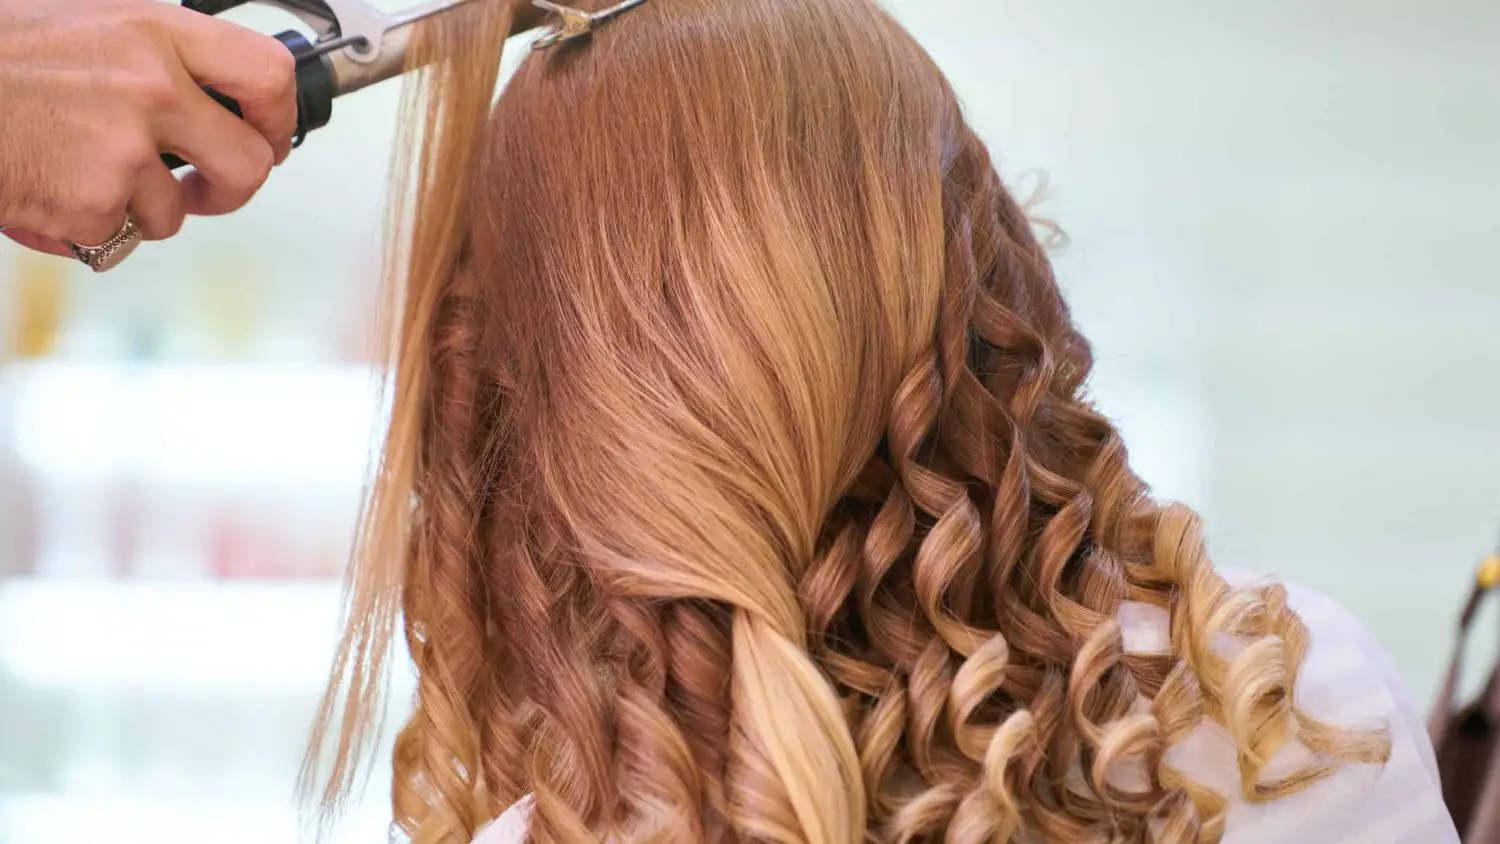 How to Use Curling Tongs – 9 Steps to Beautiful Curls